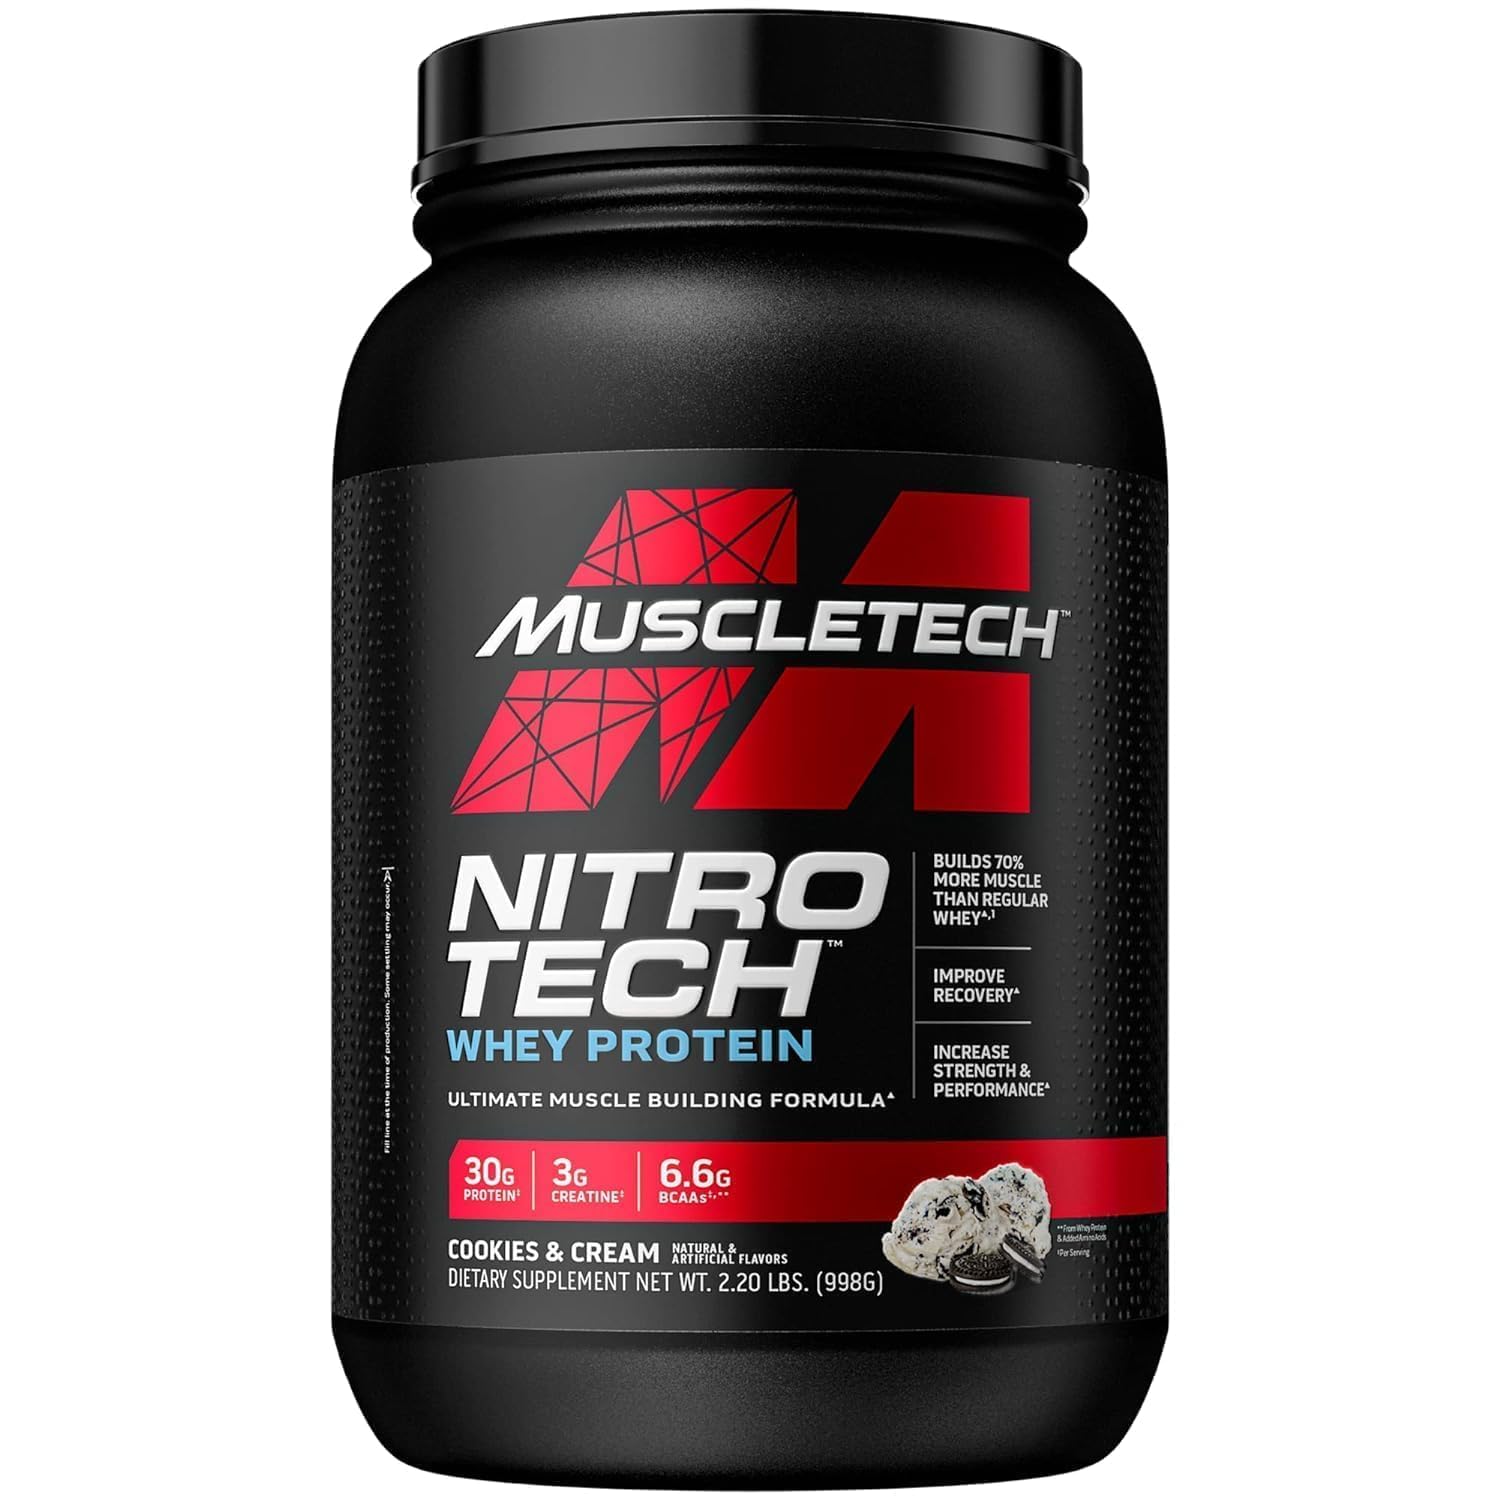 Muscletech Nitro-Tech Cookies and Cream Whey Protein Powder 998 g